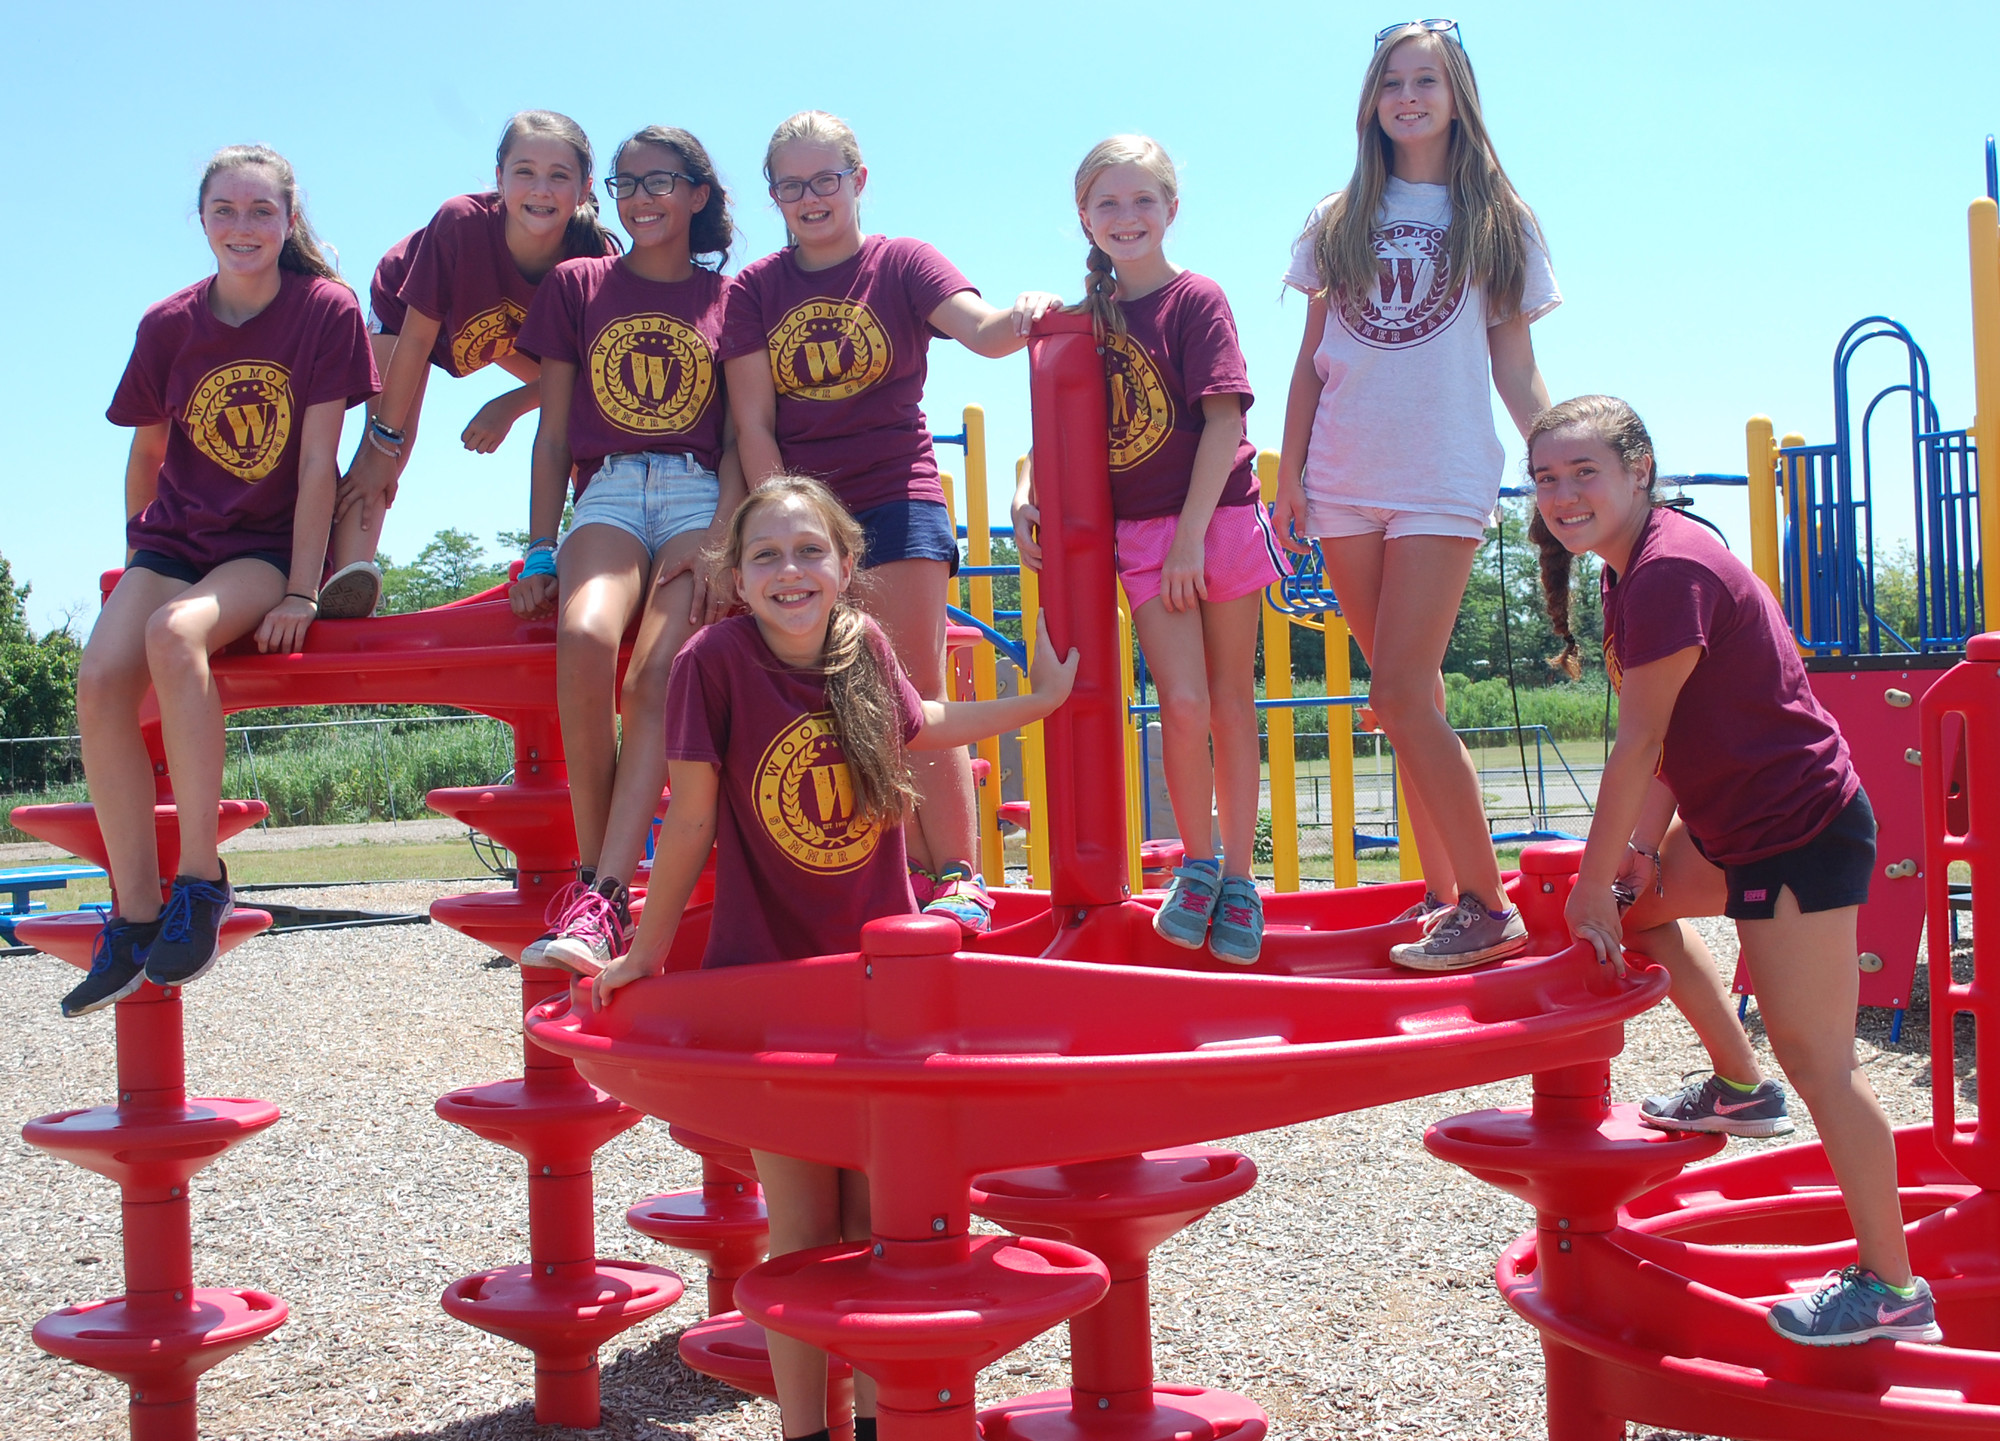 Campers enjoy spending time each day on the playground.